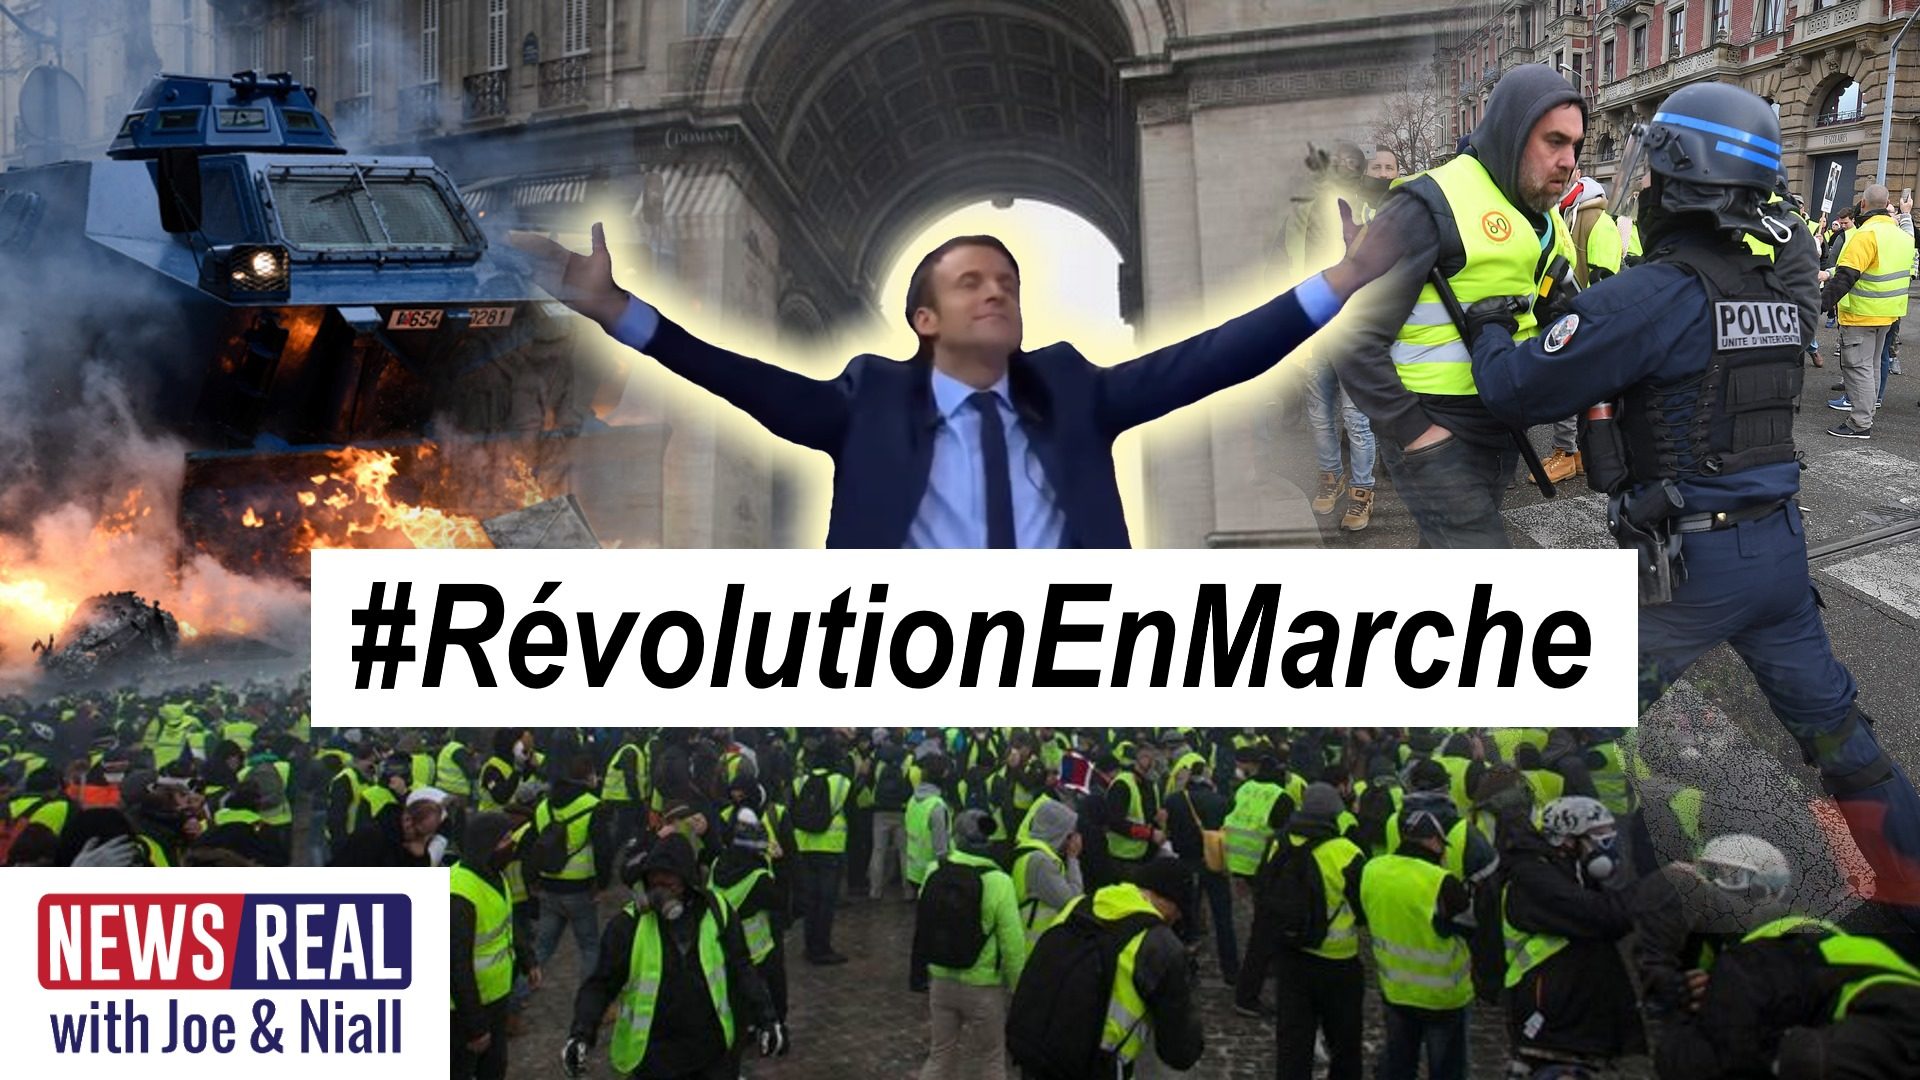 newsreal brexit yellow vests